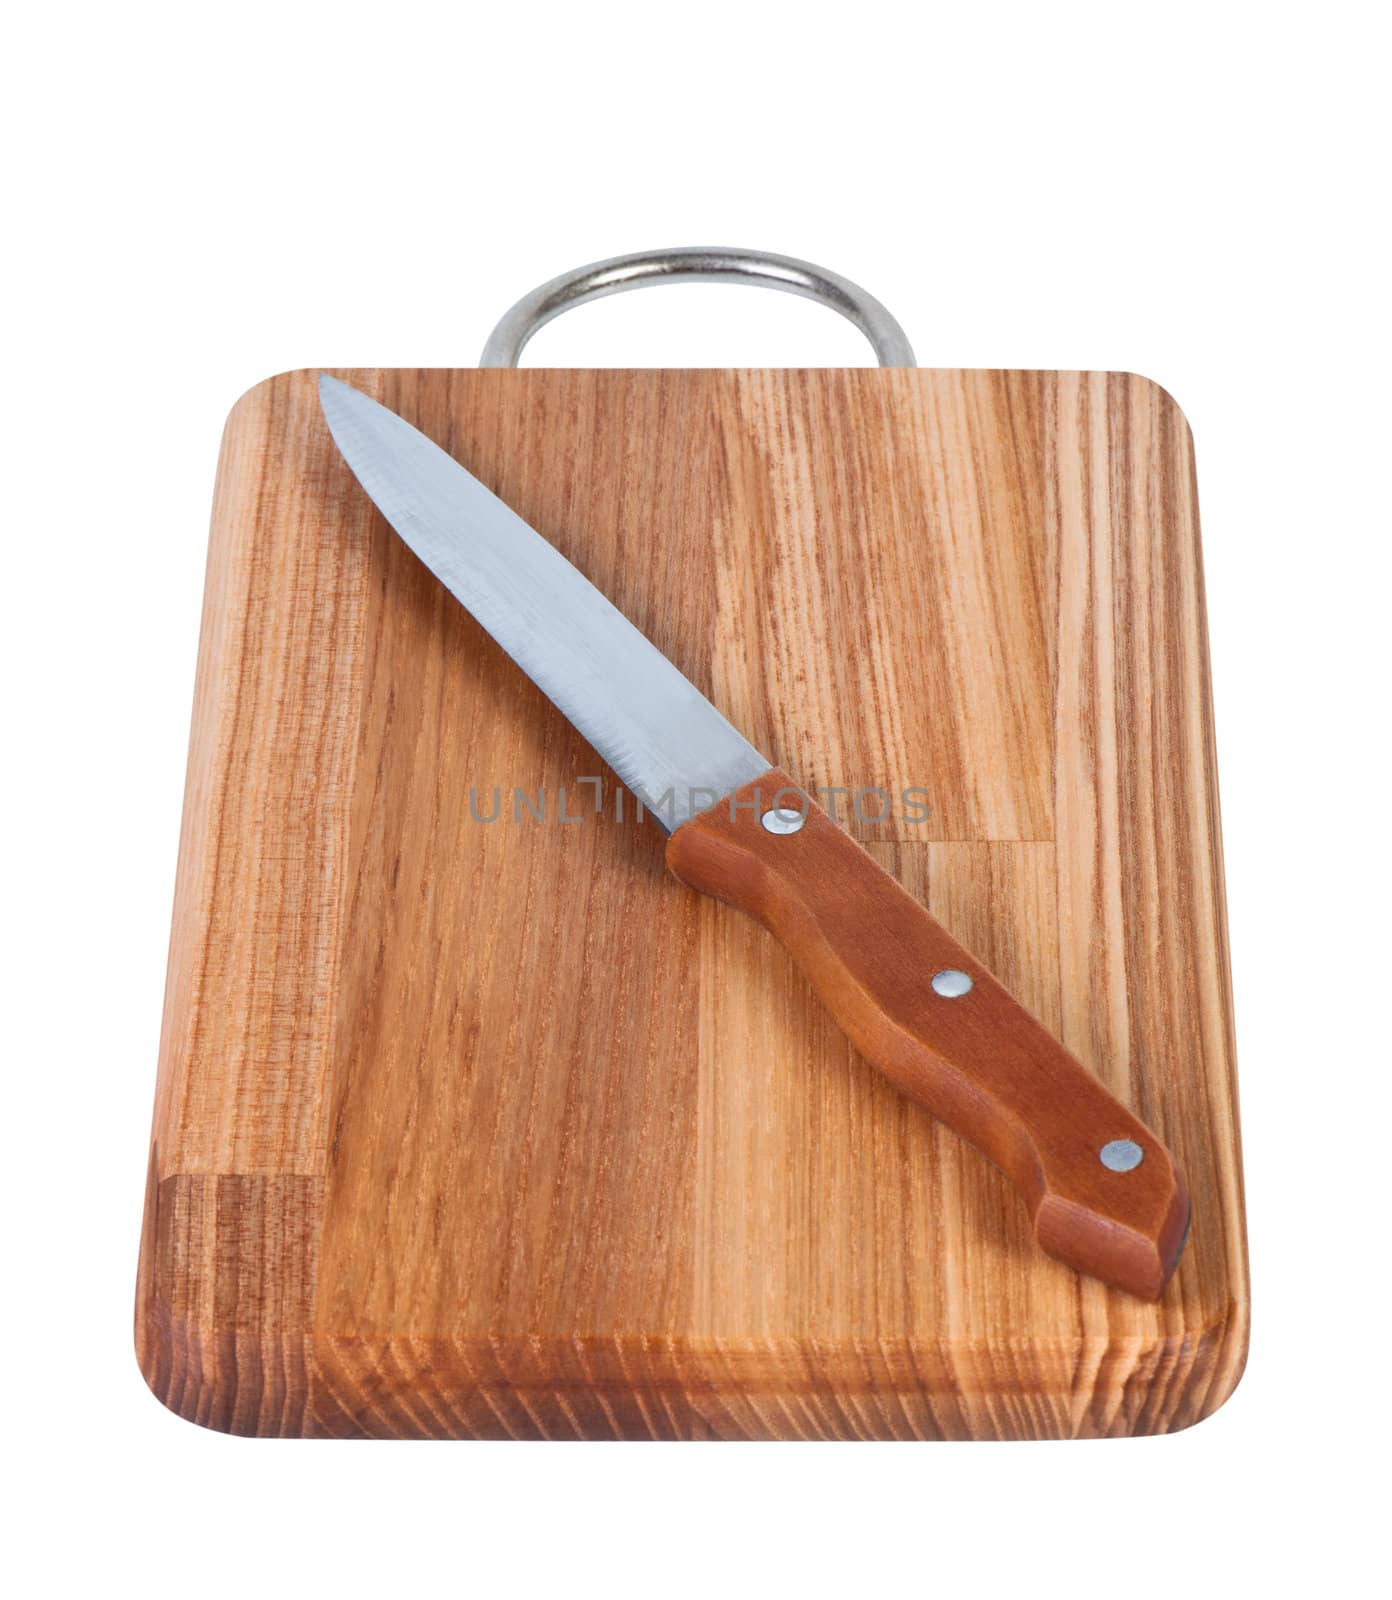 Kitchen knife on a cutting board isolated on white background.